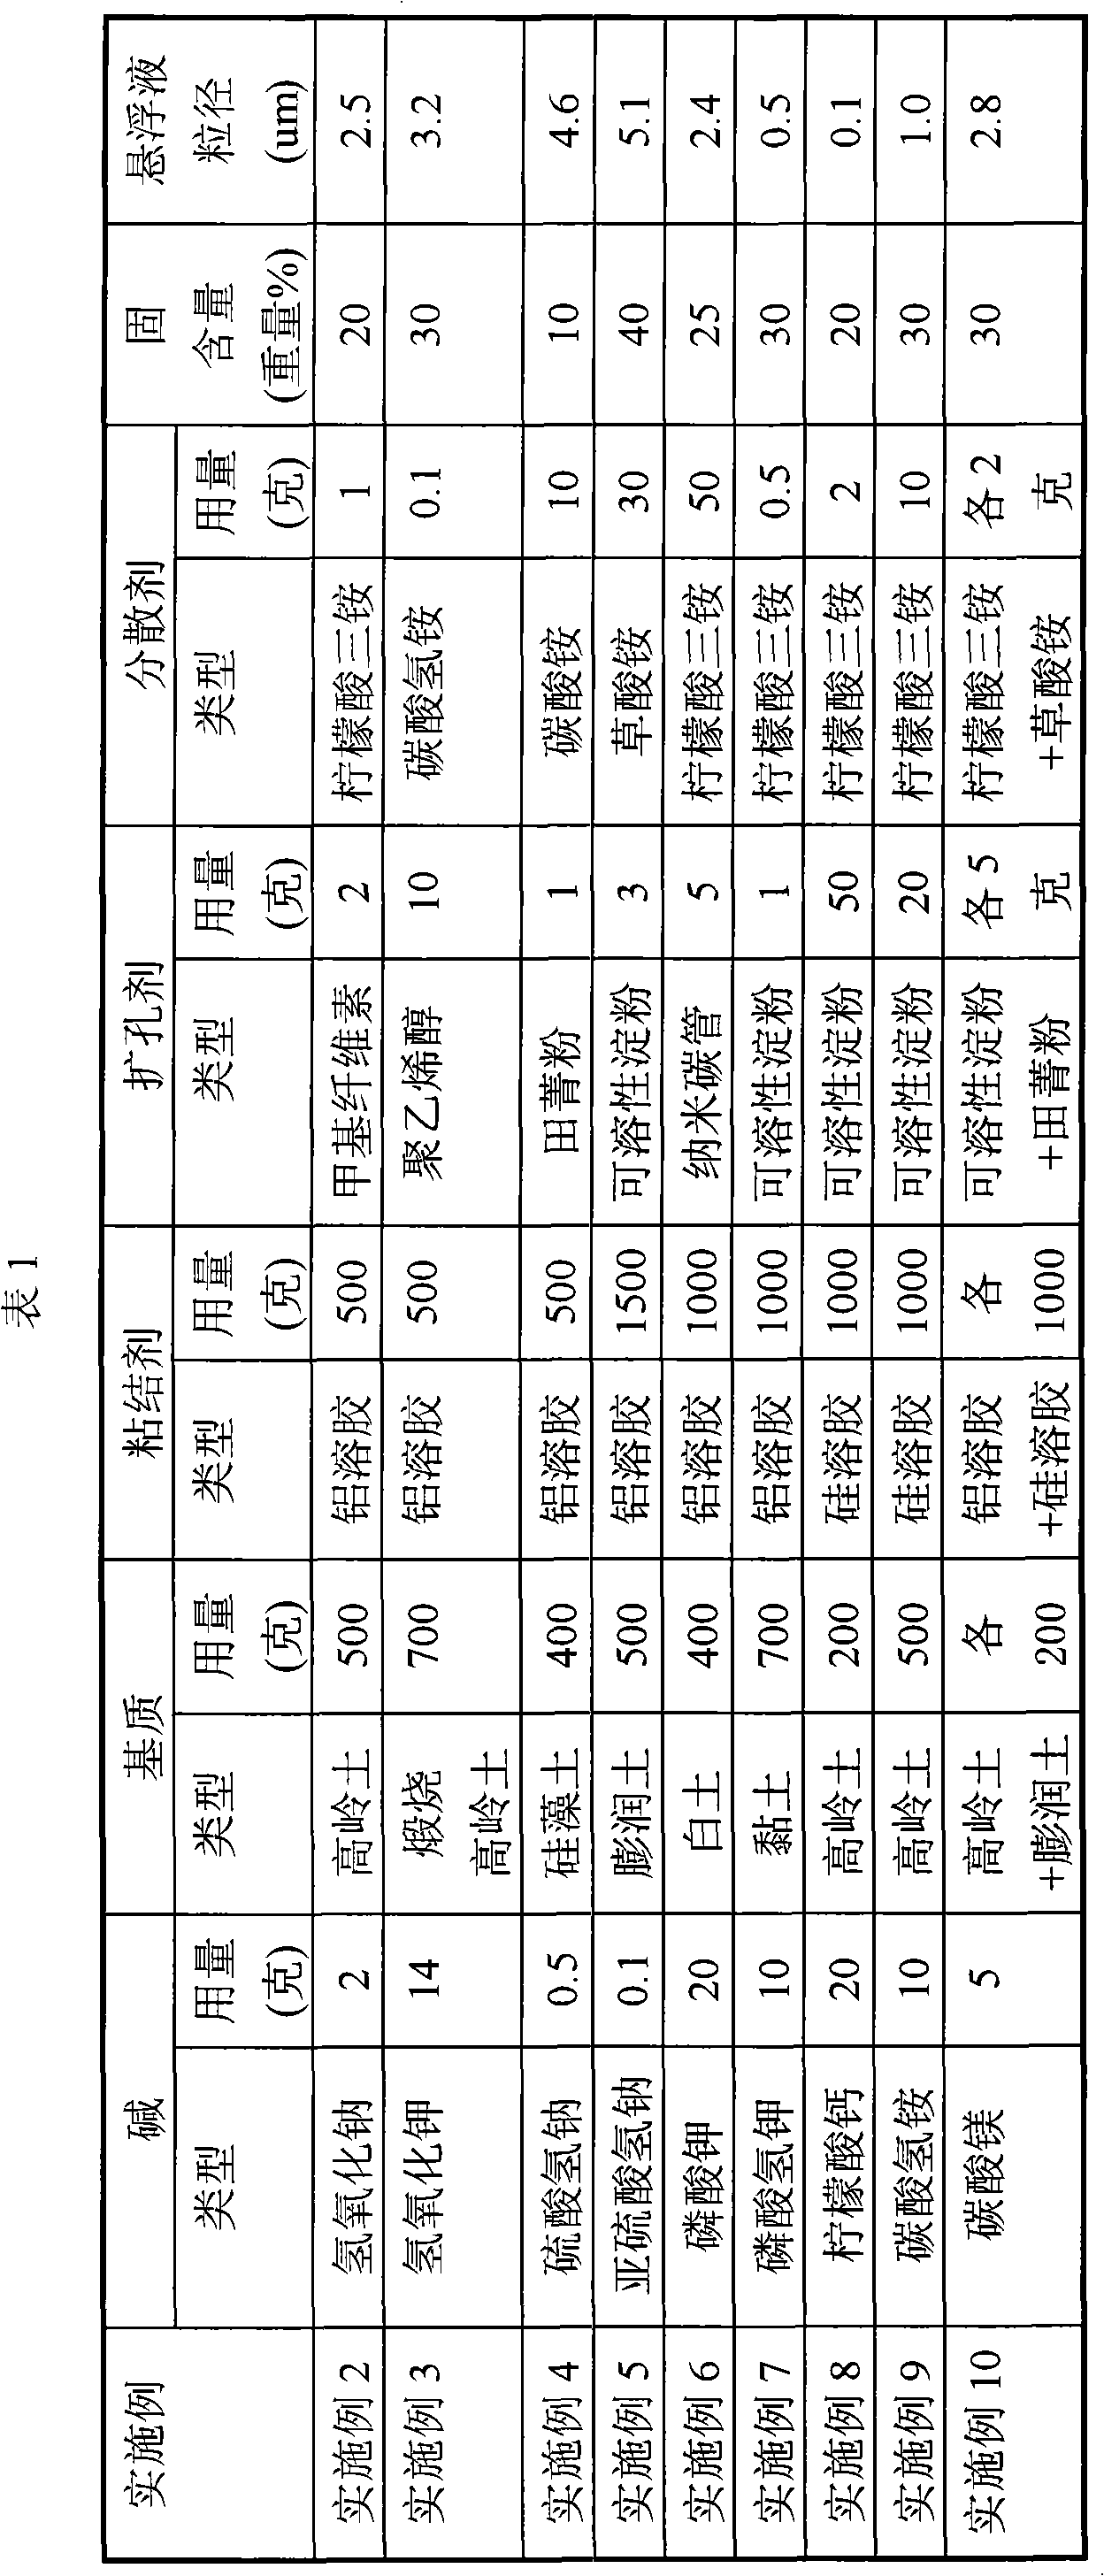 Method for producing propylene by oxygen-containing compound conversion